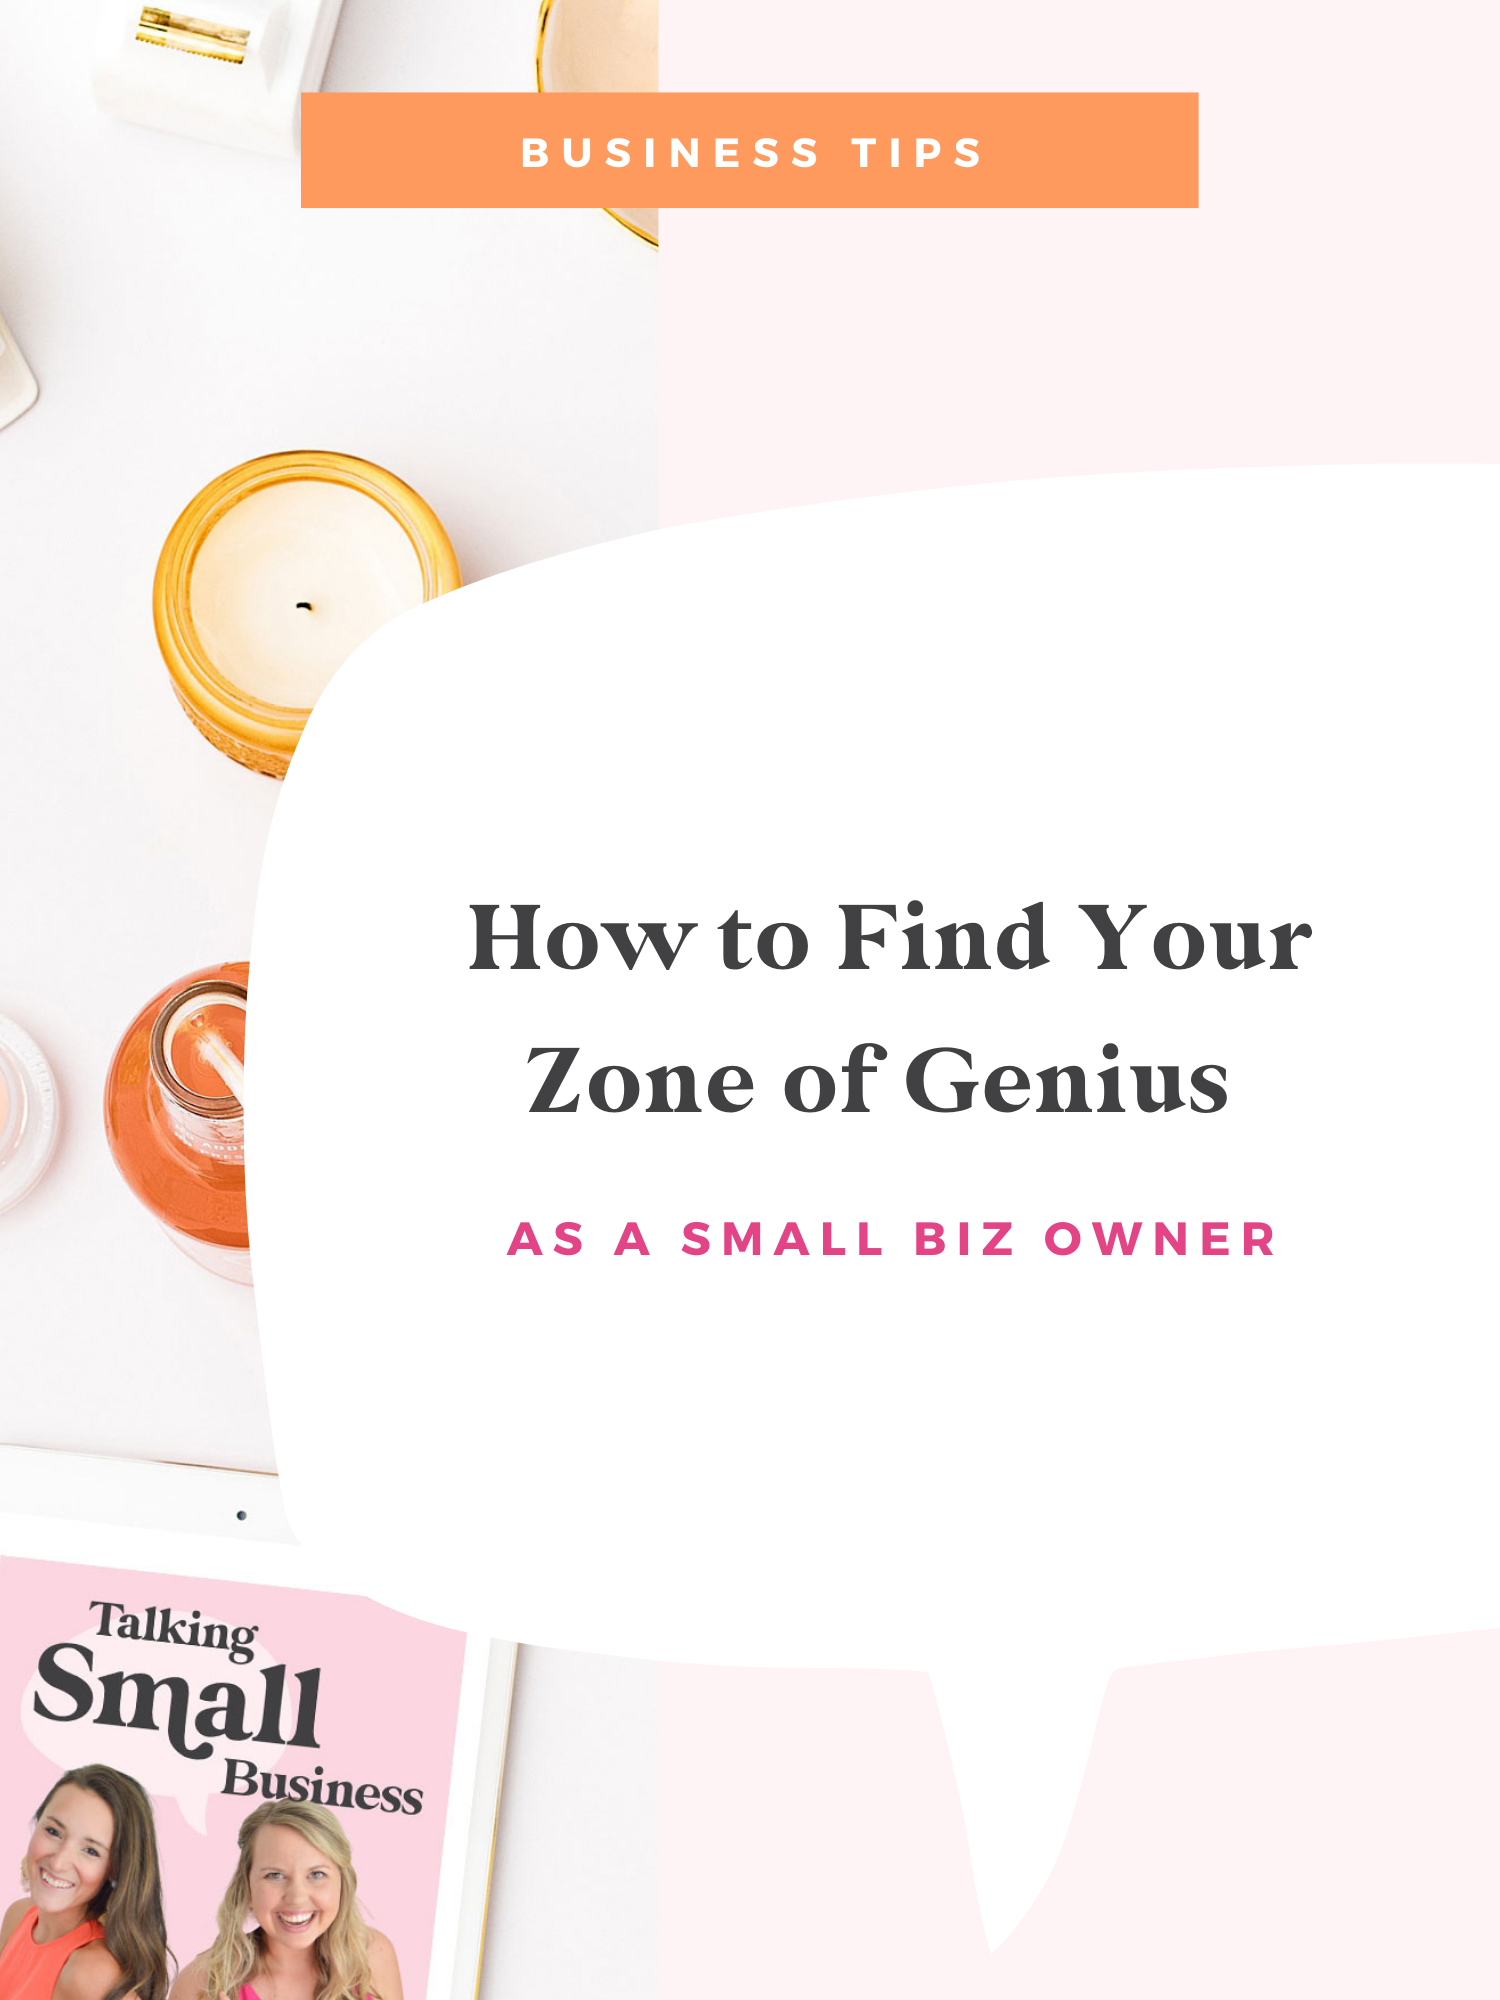 How to find your zone of genius as a small business owner: tips to recognize when you're in your zone and how to operate there with success